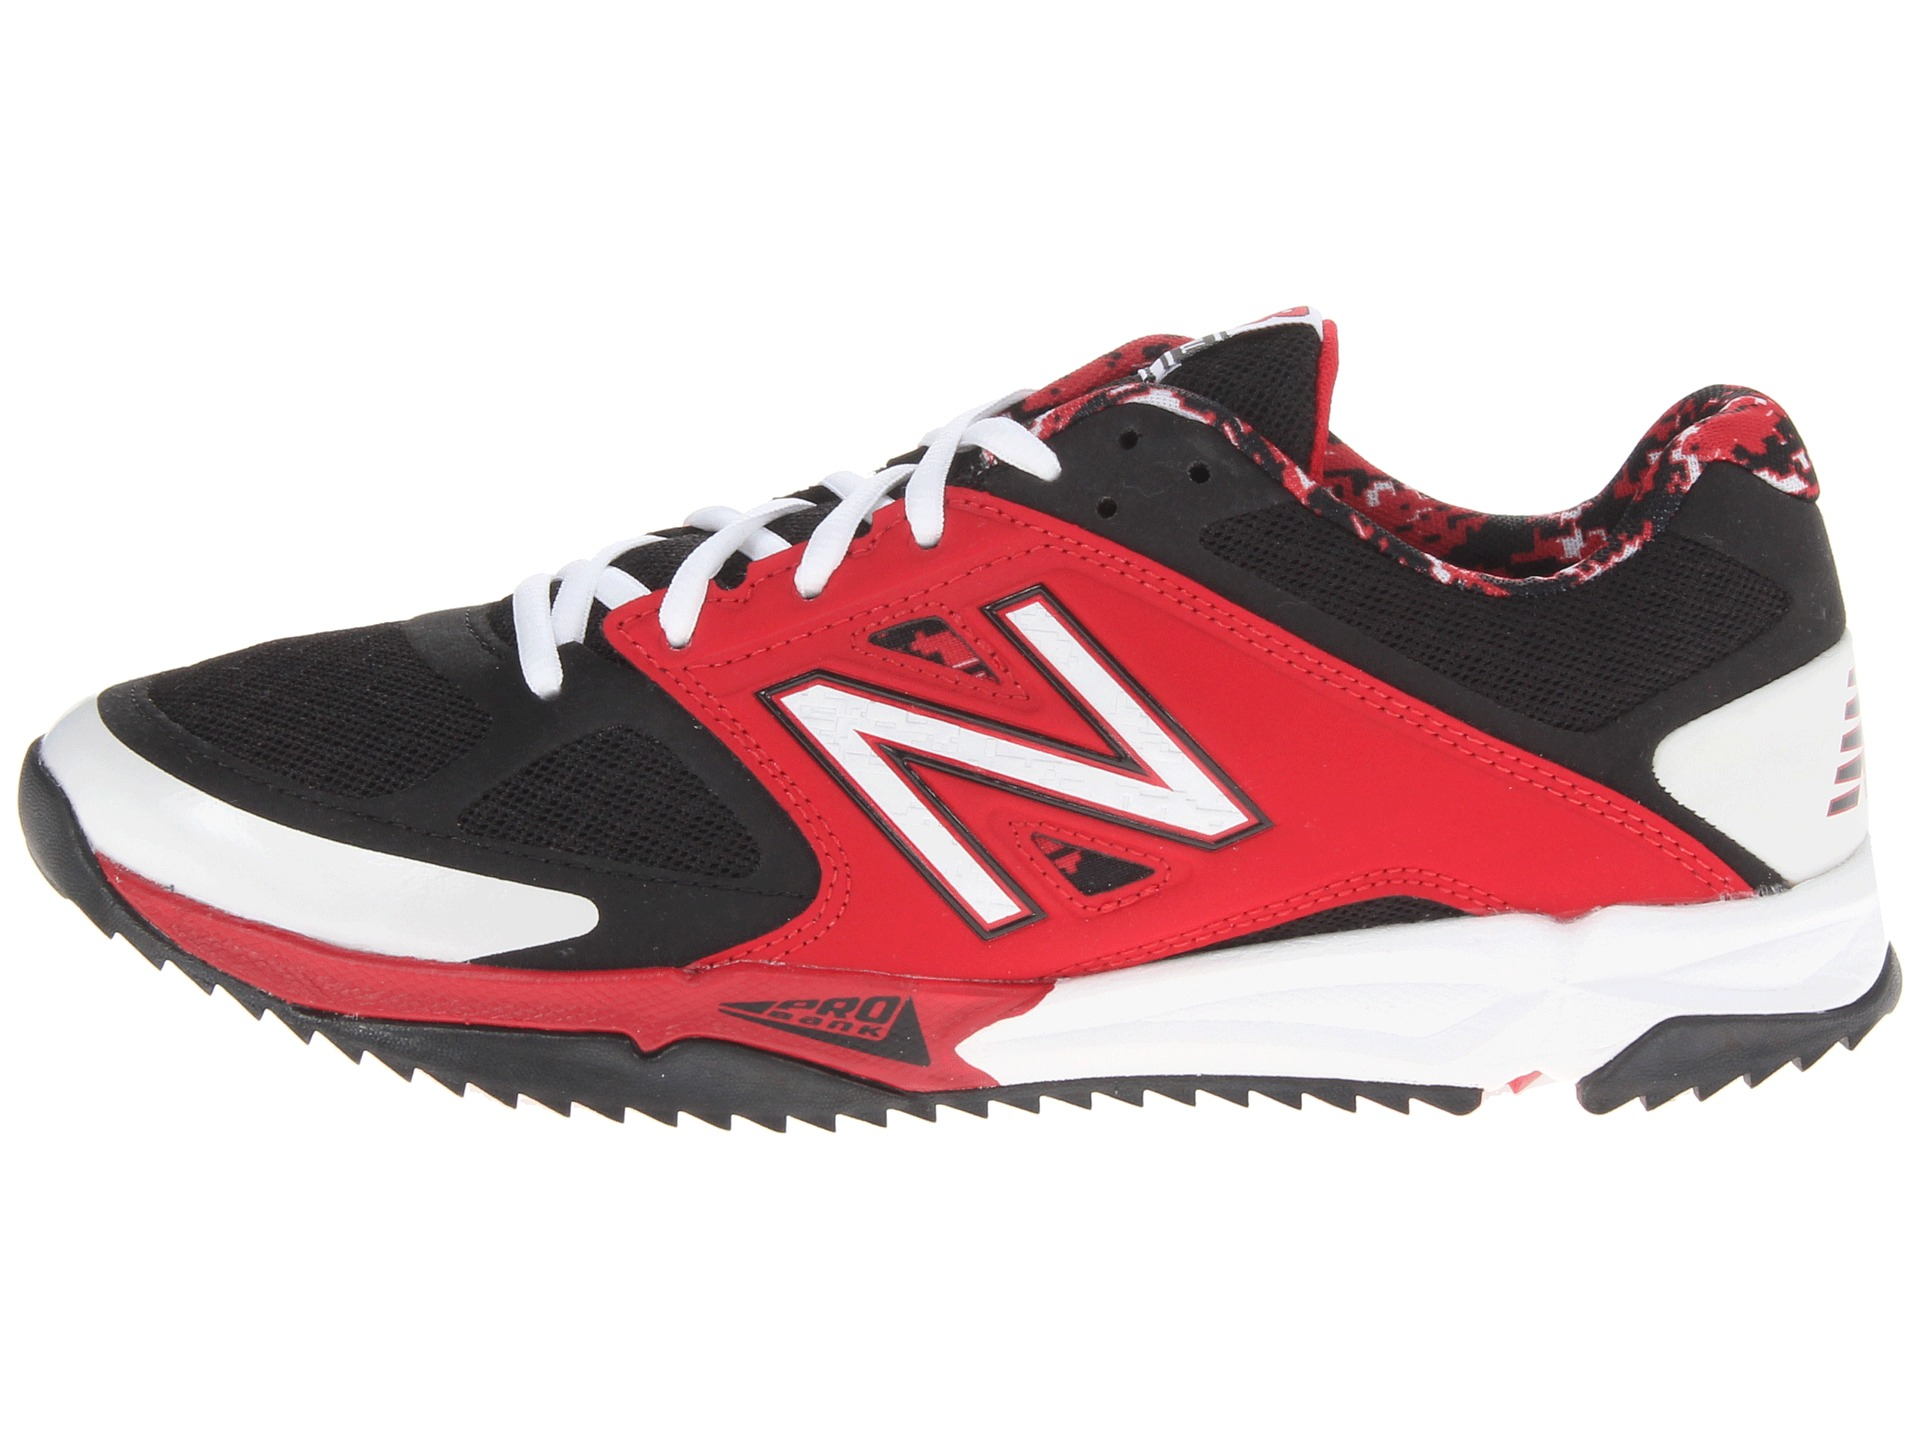 new balance red turf shoes